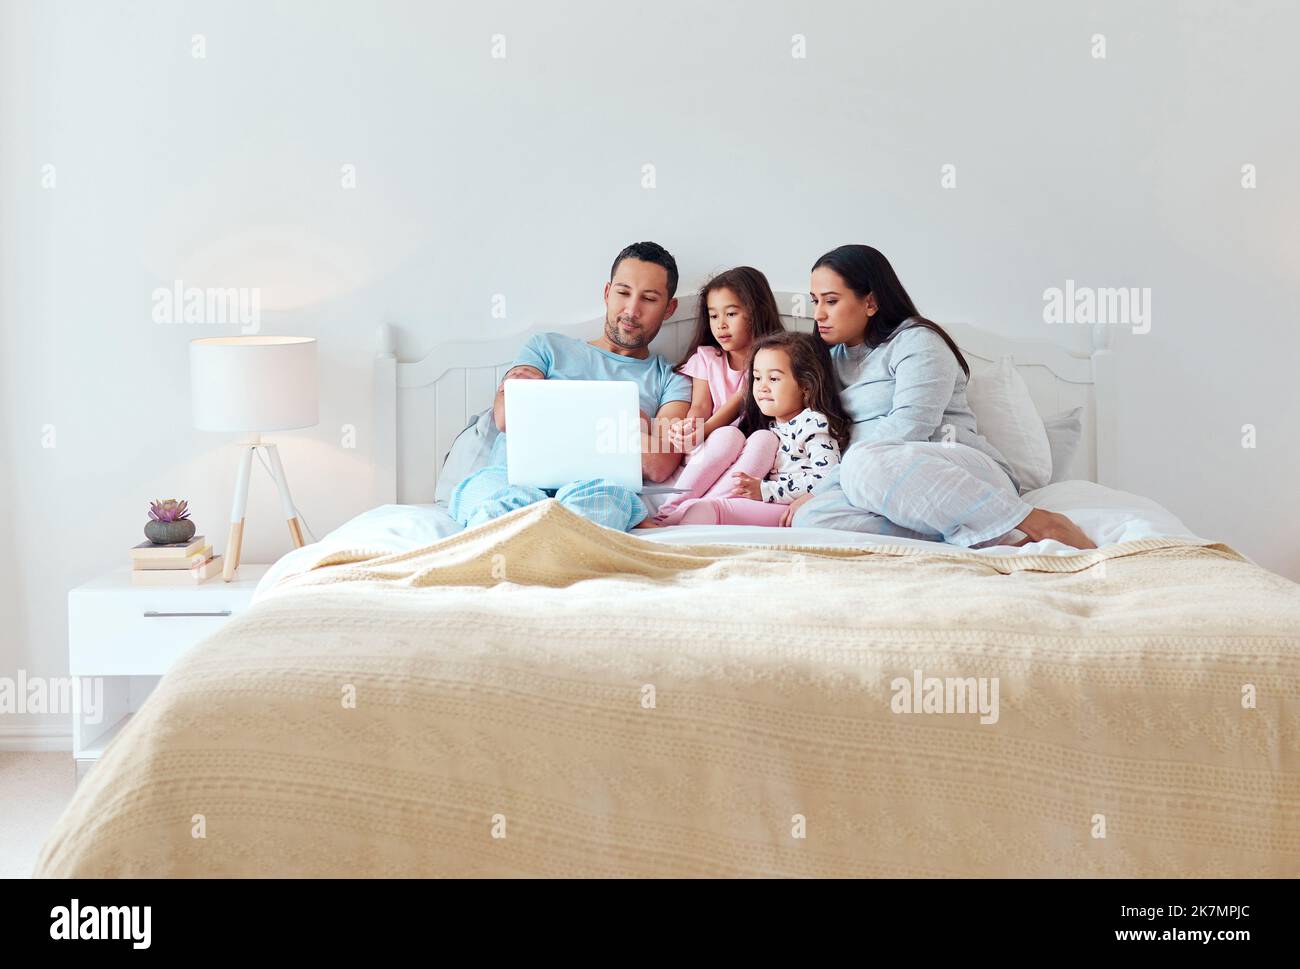 We dont remember everything but well always remember how loved we are. a man using a laptop while sitting with his wife and two daughters. Stock Photo